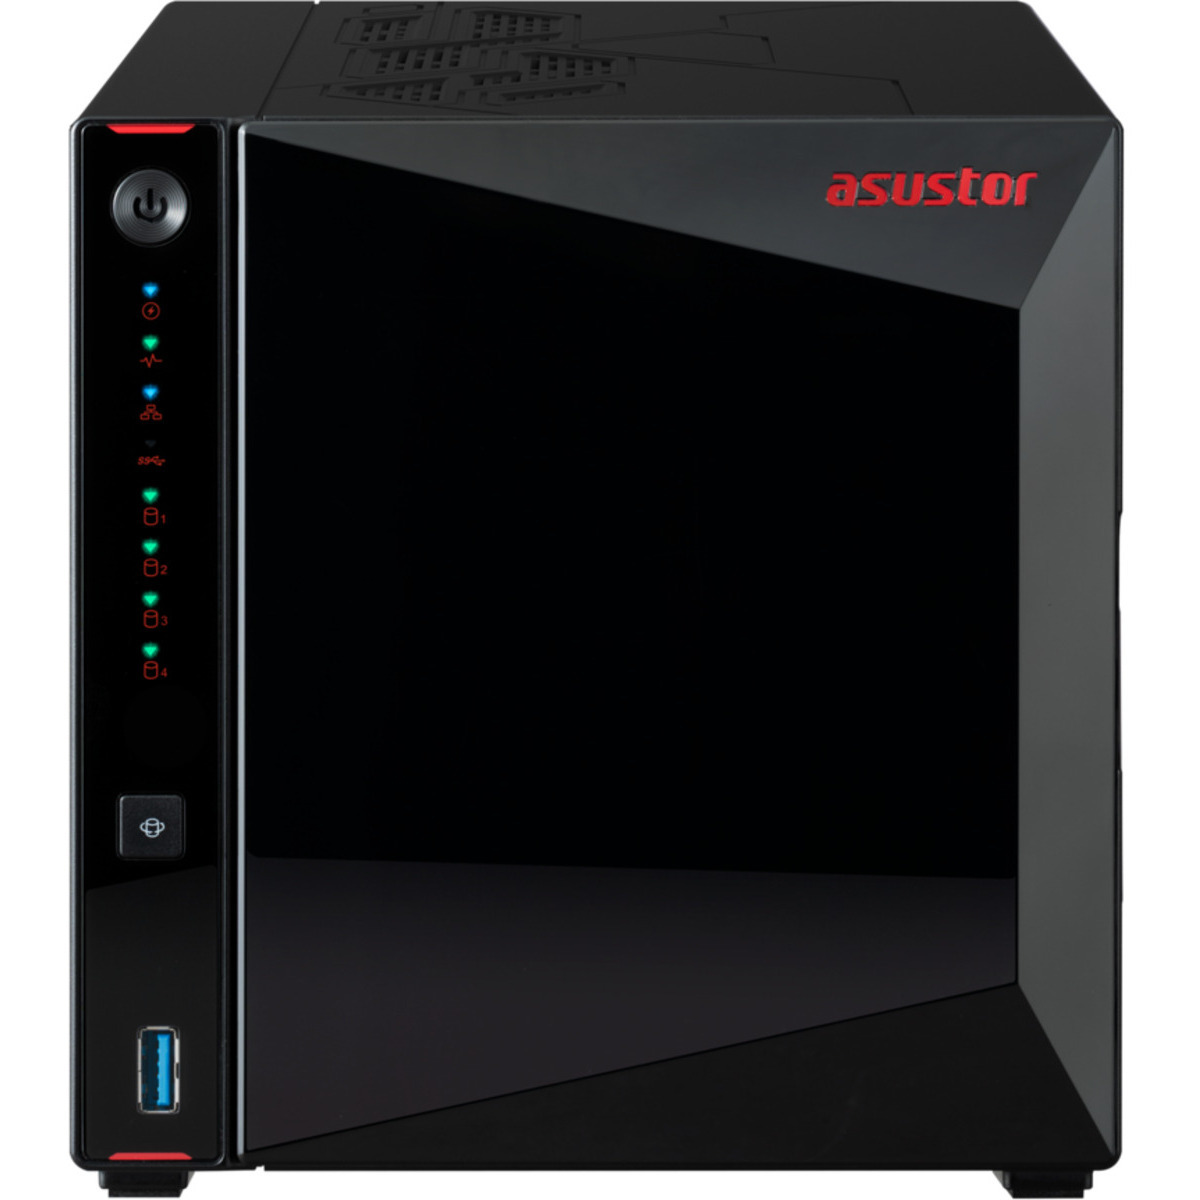 buy $2791 ASUSTOR Nimbustor 4 Gen2 AS5404T 88tb Desktop NAS - Network Attached Storage Device 4x22000gb Seagate IronWolf Pro ST22000NT001 3.5 7200rpm SATA 6Gb/s HDD NAS Class Drives Installed - Burn-In Tested - FREE RAM UPGRADE - nas headquarters buy network attached storage server device das new raid-5 free shipping simply usa Nimbustor 4 Gen2 AS5404T